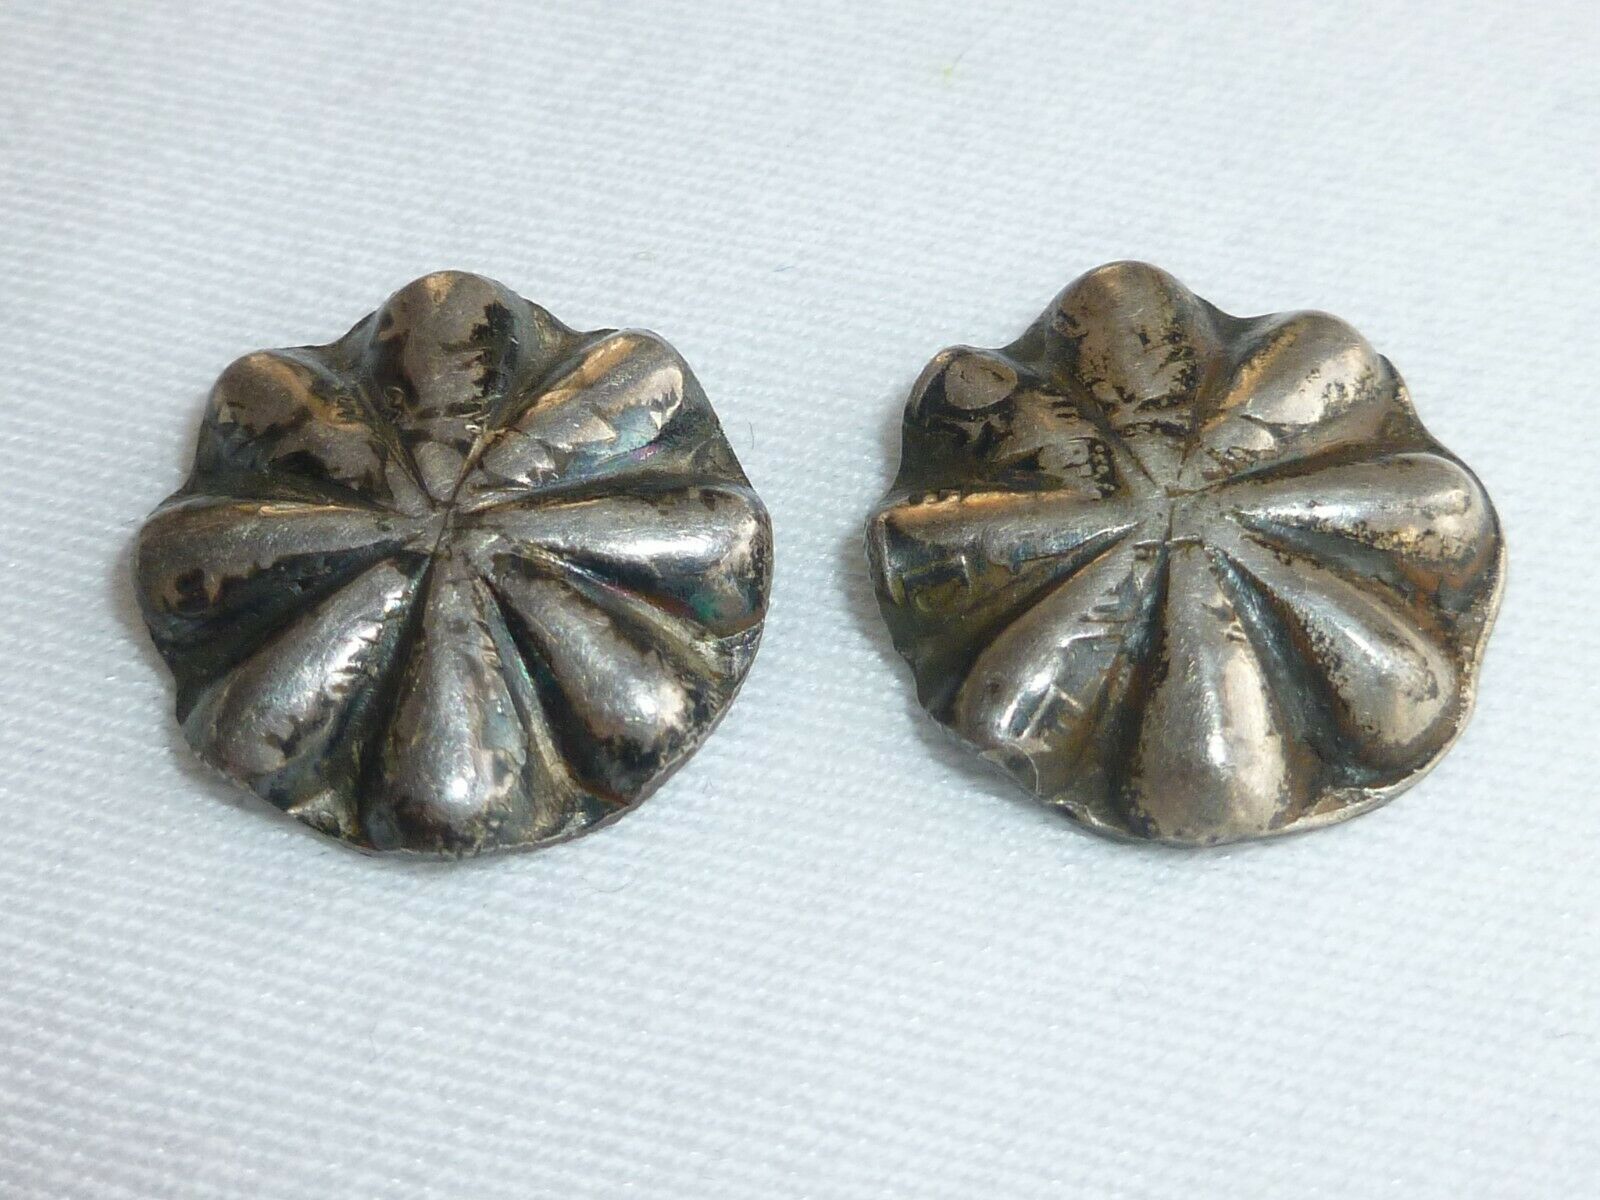 2 Older Navajo Indian Silver Buttons Made From Mercury Dimes 11/16"